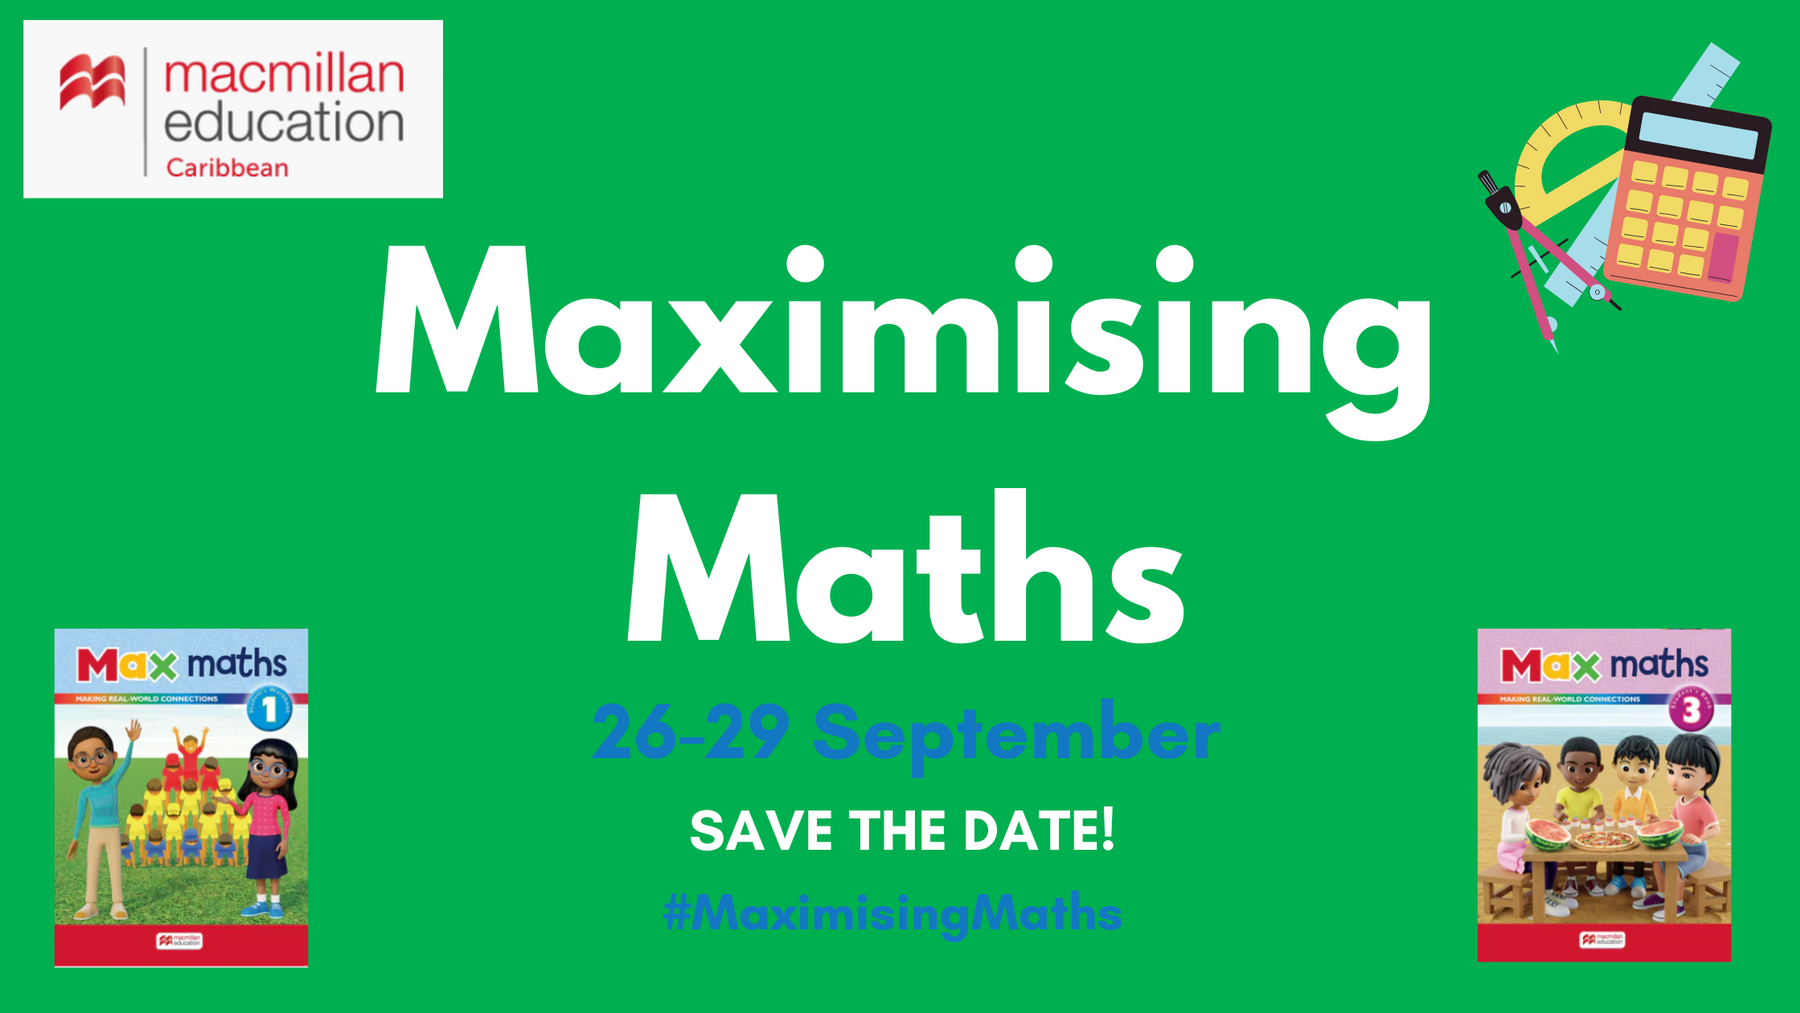 Join our first ever bumper series of Maths webinars!